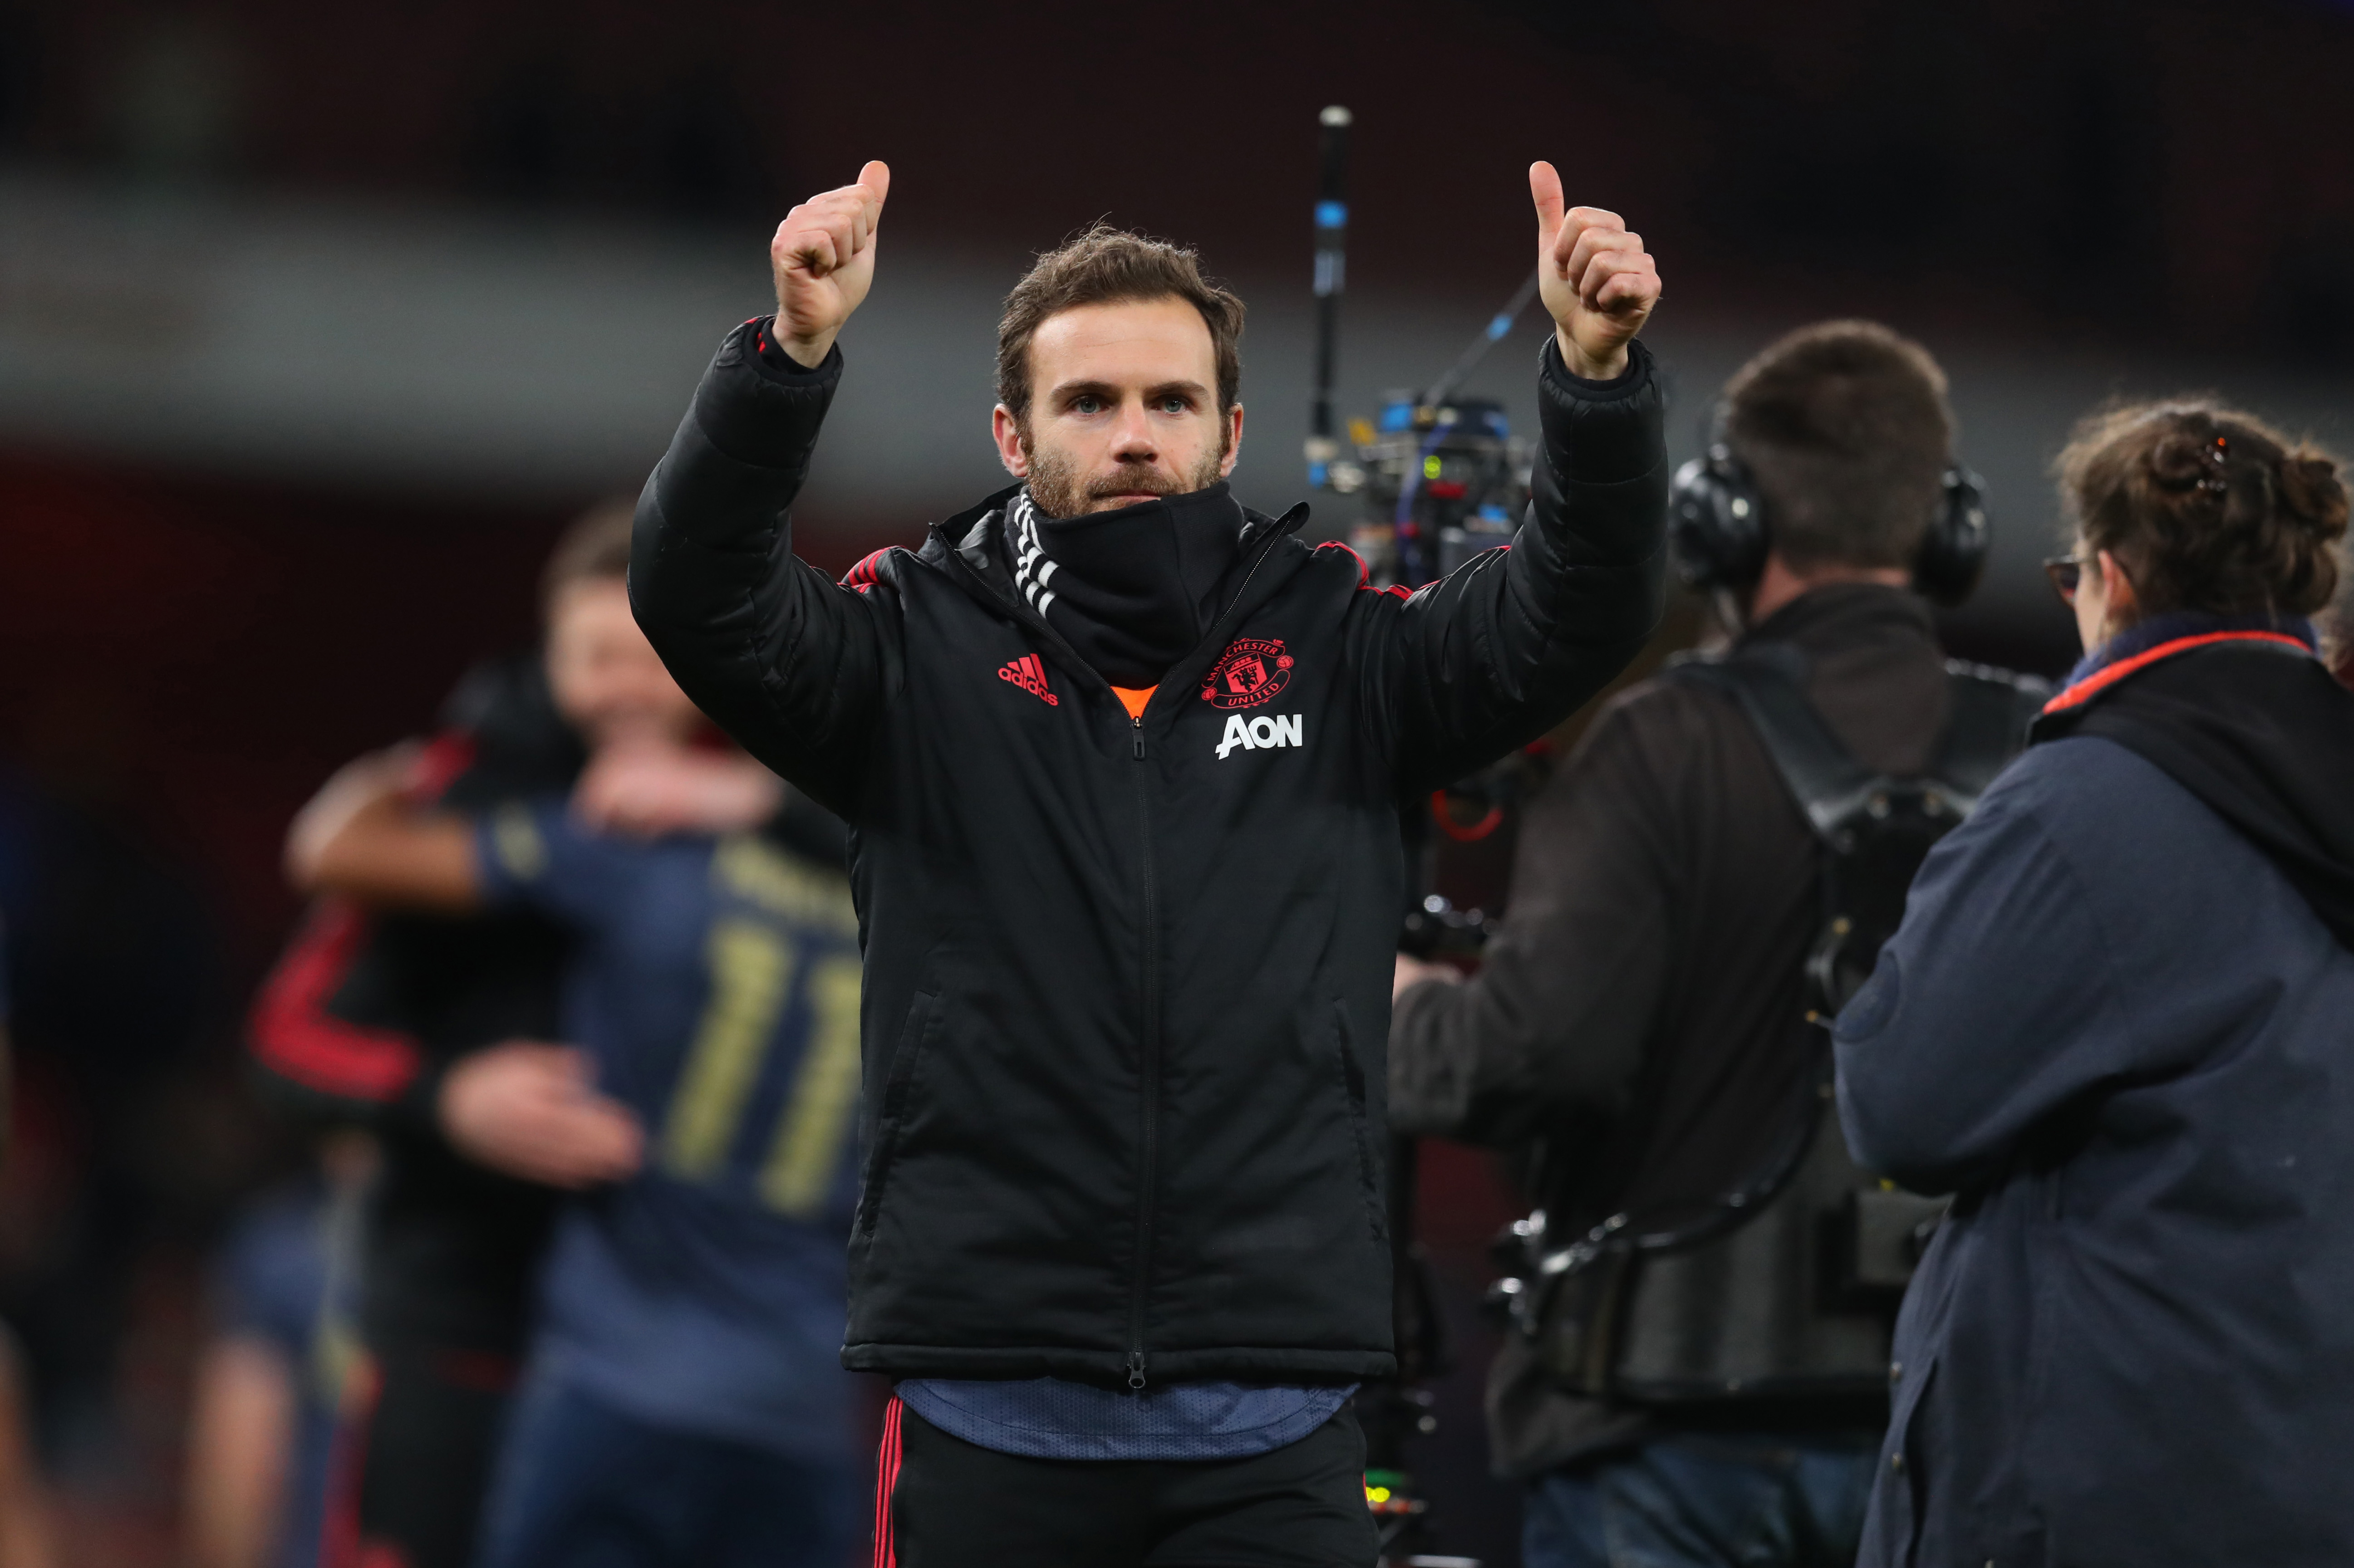 LONDON, ENGLAND - JANUARY 25: Juan Mata of Manchester United applauds after the FA Cup Fourth Round match between Arsenal and Manchester United at Emirates Stadium on January 25, 2019 in London, United Kingdom. (Photo by Catherine Ivill/Getty Images)